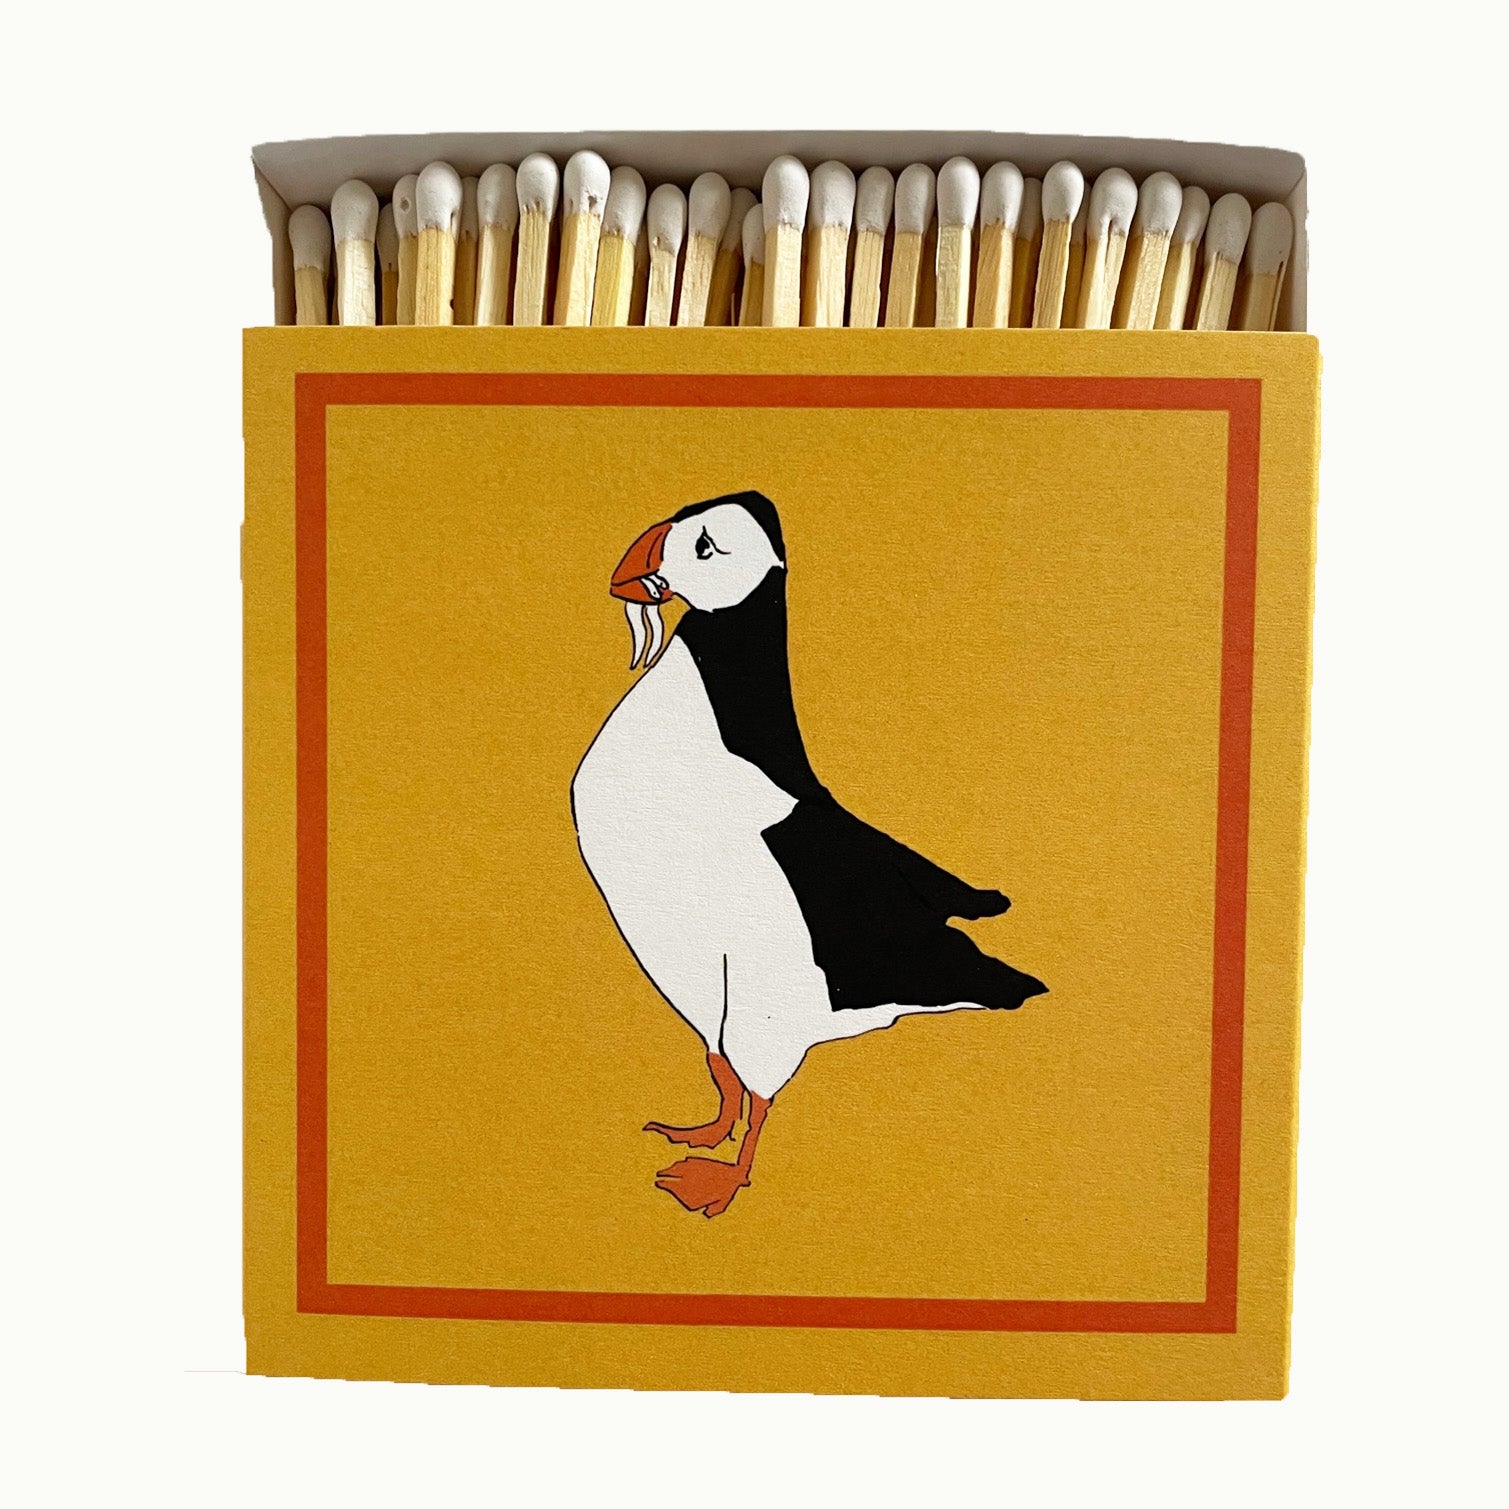 match box with puffin design on the front